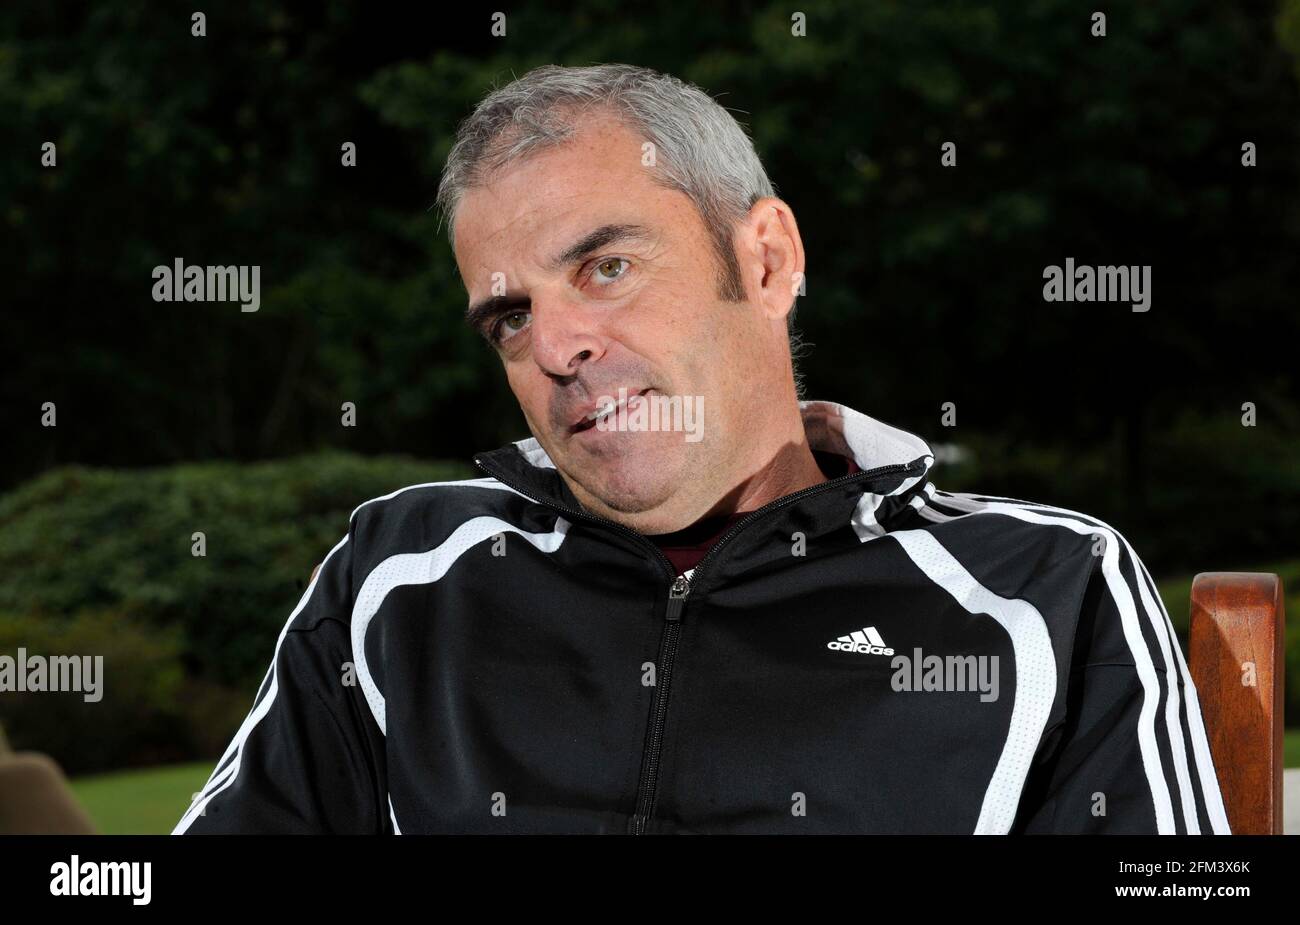 RYDER CUP VICE-CAPTIAN PAUL McGINLEY  15/9/10  PICTURE DAVID ASHDOWN Stock Photo